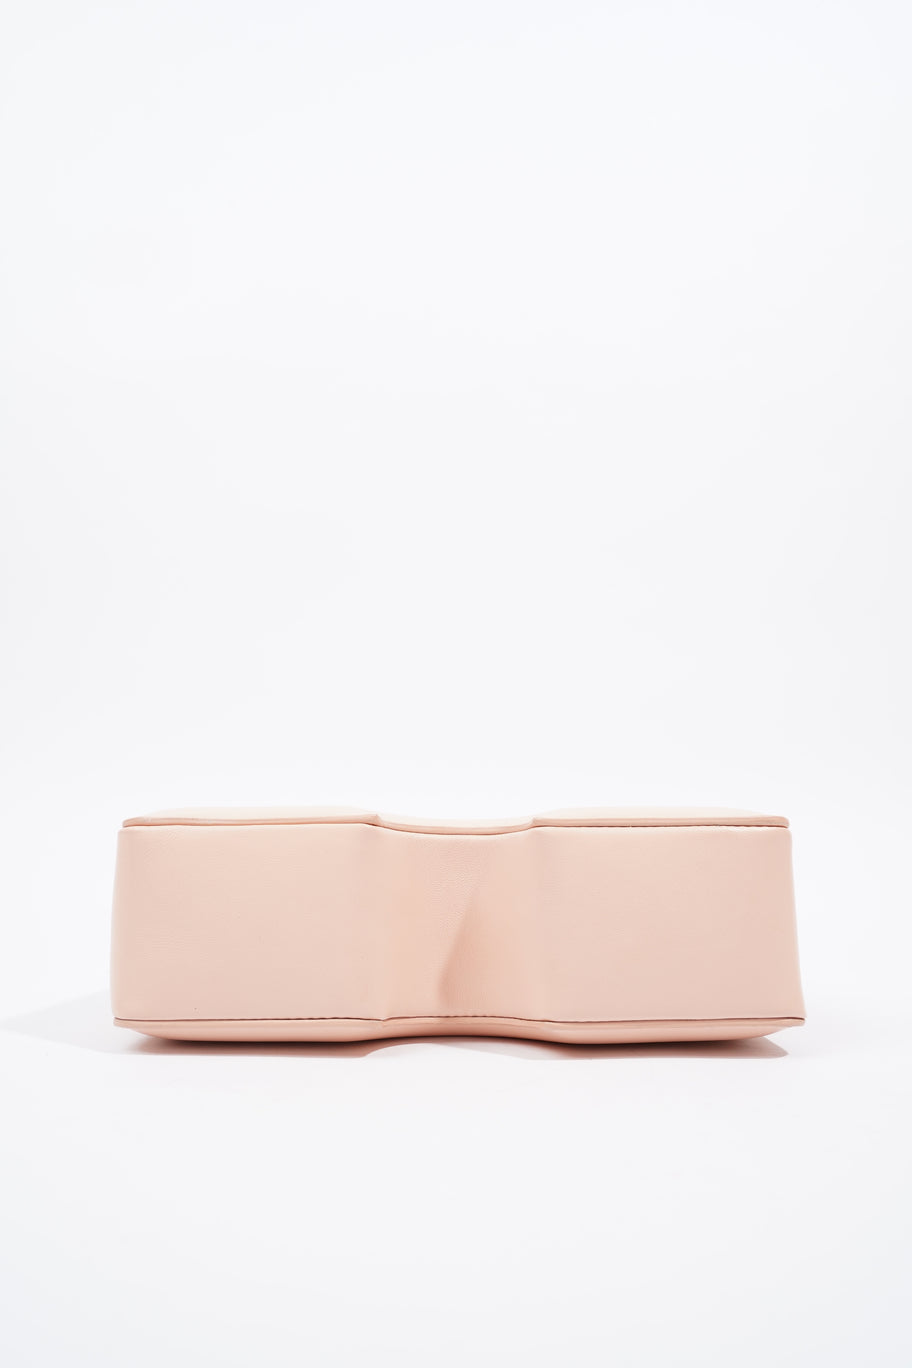 Burrow Zipped Pouch 20 Baby Pink Leather Image 6